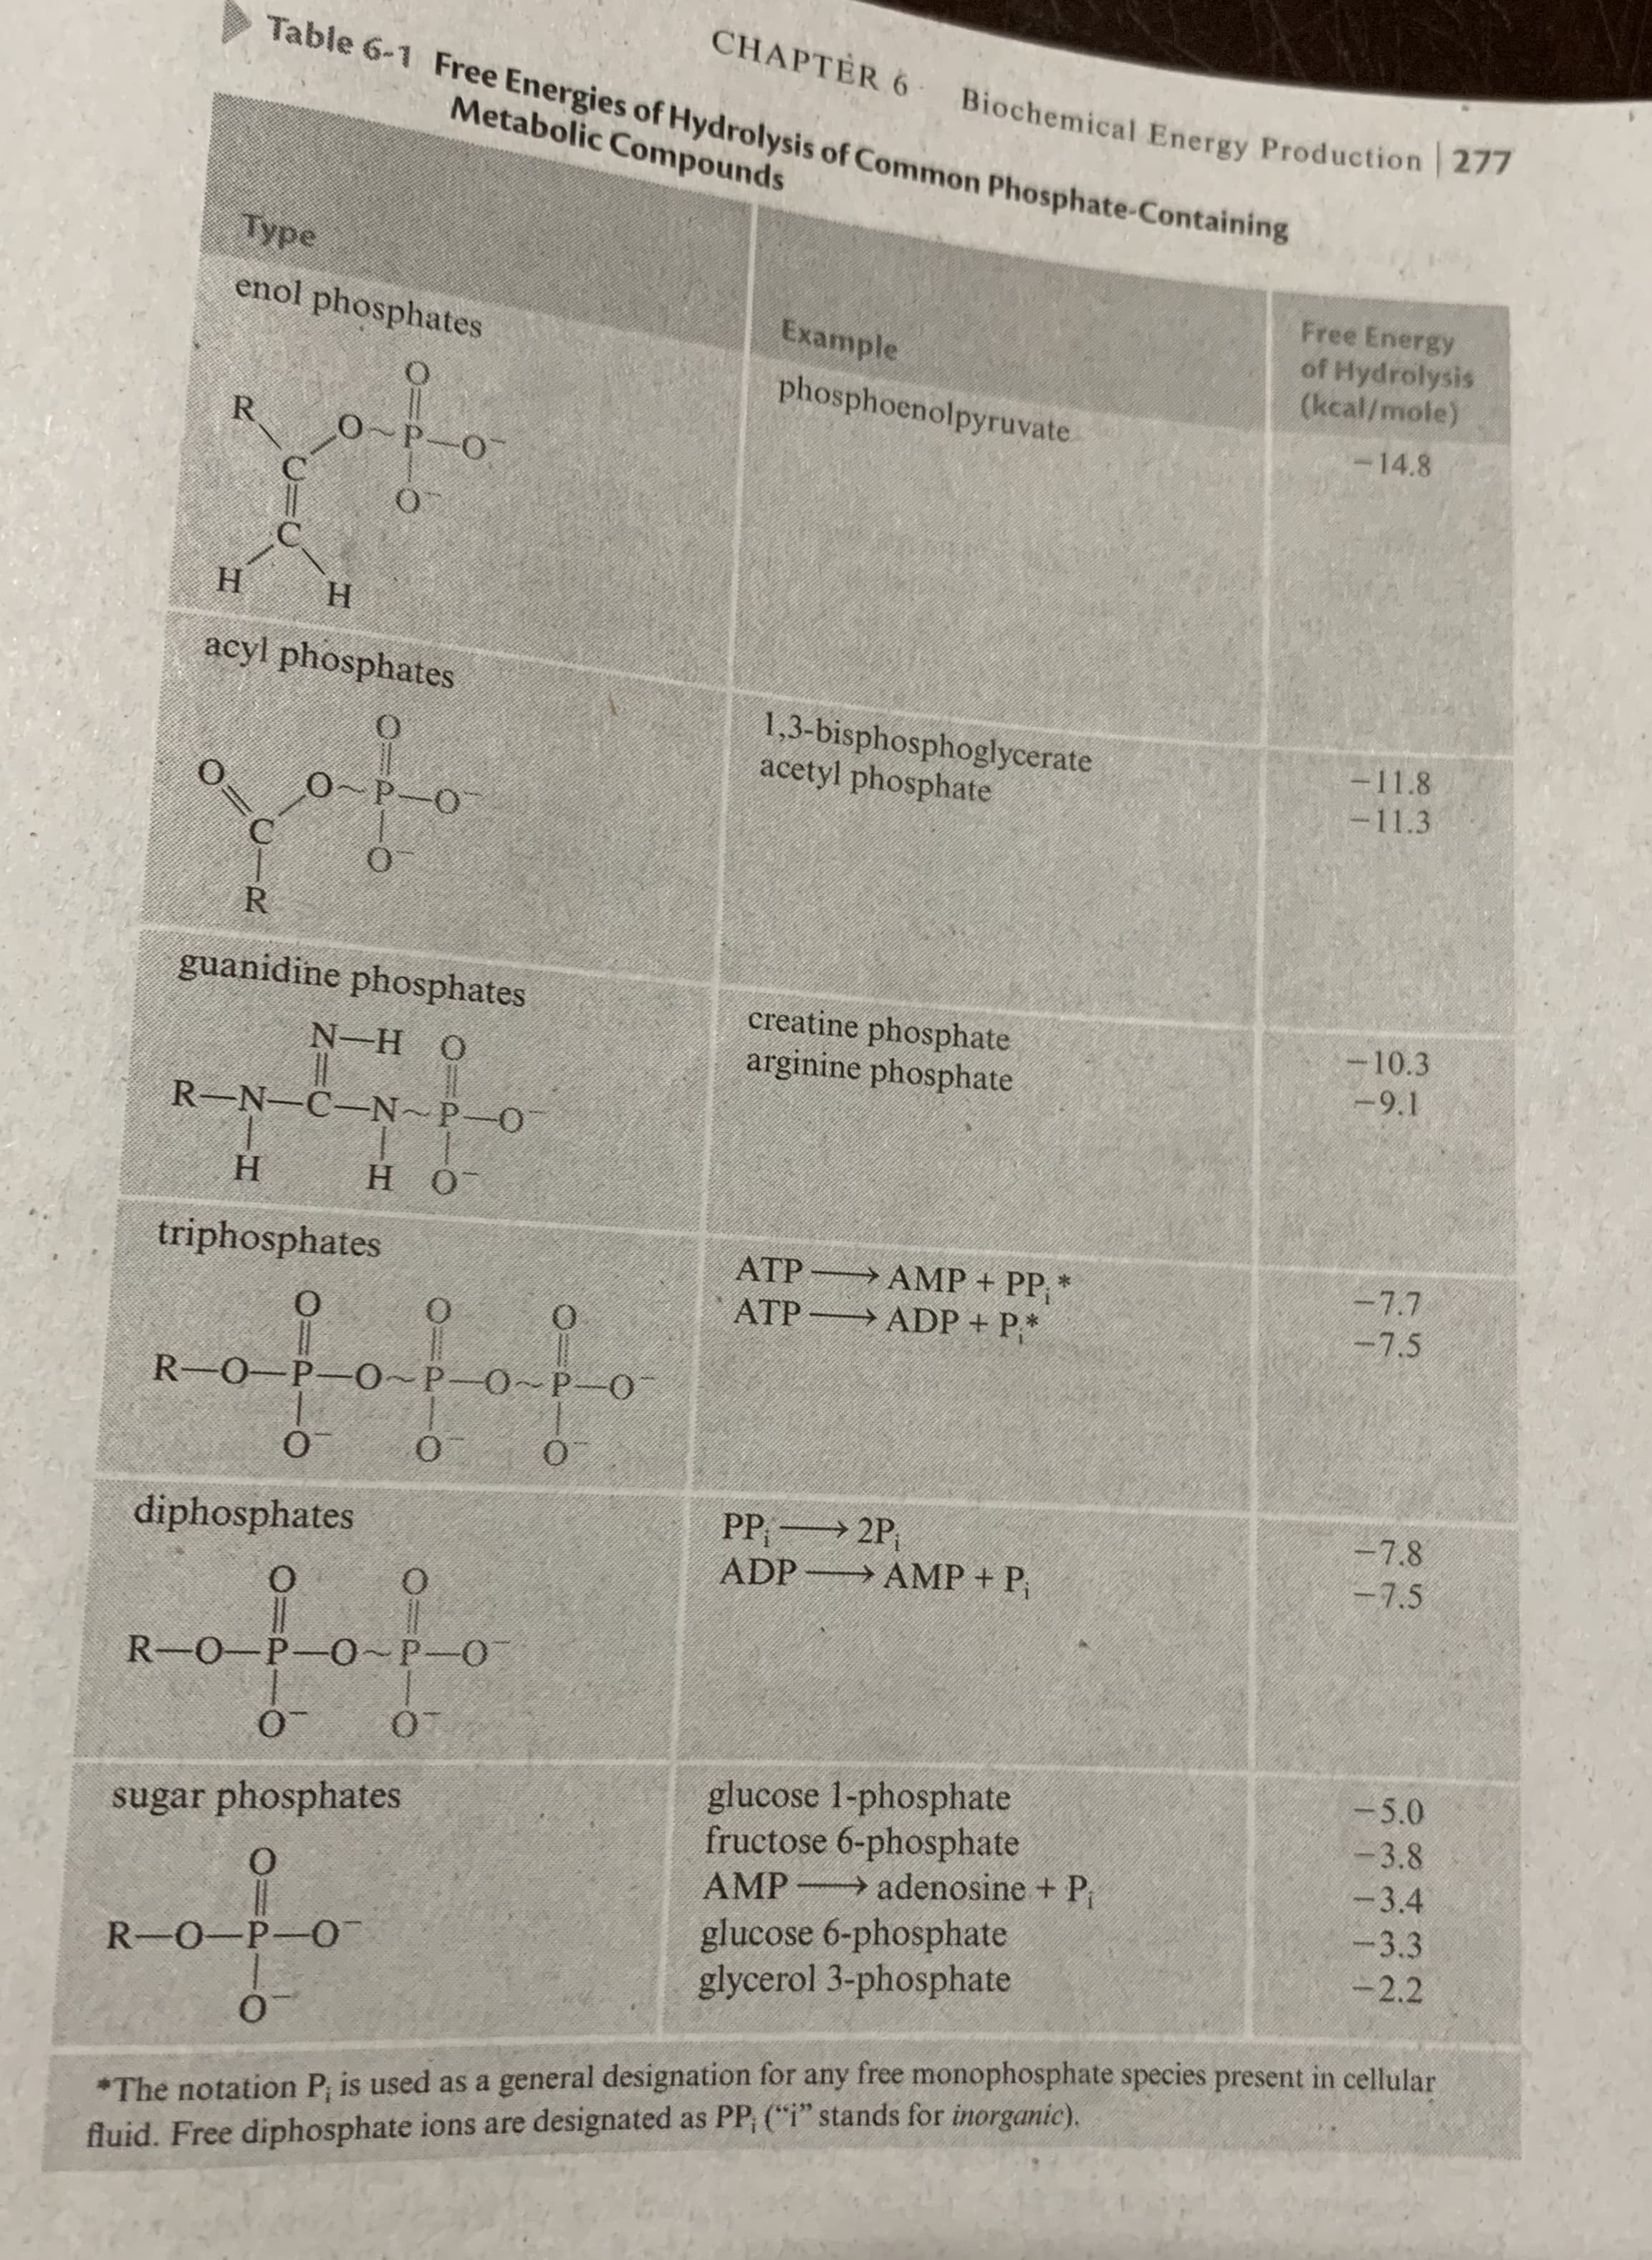 Table 6-1 Free Energies of Hydrolysis of Common Phosphate-Containing
CHAPTER 6 Biochemical Energy Production 277
Metabolic Compounds
Type
Free Energy
enol phosphates
Example
of Hydrolysis
(kcal/mole)
phosphoenolpyruvate.
-14.8
0~P-O
Н
Н
acyl phosphates
1,3-bisphosphoglycerate
acetyl phosphate
-11.8
-11.3
0~P-O
R
guanidine phosphates
creatine phosphate
arginine phosphate
-10.3
N-H O
-9.1
R-N-C-N~P-O
Н
НоО
triphosphates
-7.7
ATP AMP + PP, *
ATP ADP + P*
-7.5
R-O-P-0~P-0~P-0
-7.8
PP; 2P,
ADP AMP + P,
diphosphates
-7.5
R-O-P-0~P-O
-5.0
glucose 1-phosphate
fructose 6-phosphate
AMP
glucose 6-phosphate
glycerol 3-phosphate
-3.8
sugar phosphates
-3.4
adenosine + P
3.3
-2.2
R-O-P-O
*The notation P; is used as a general designation for any free monophosphate species present in cellular
fluid. Free diphosphate ions are designated as PP; ("i" stands for inorganic).
R.
